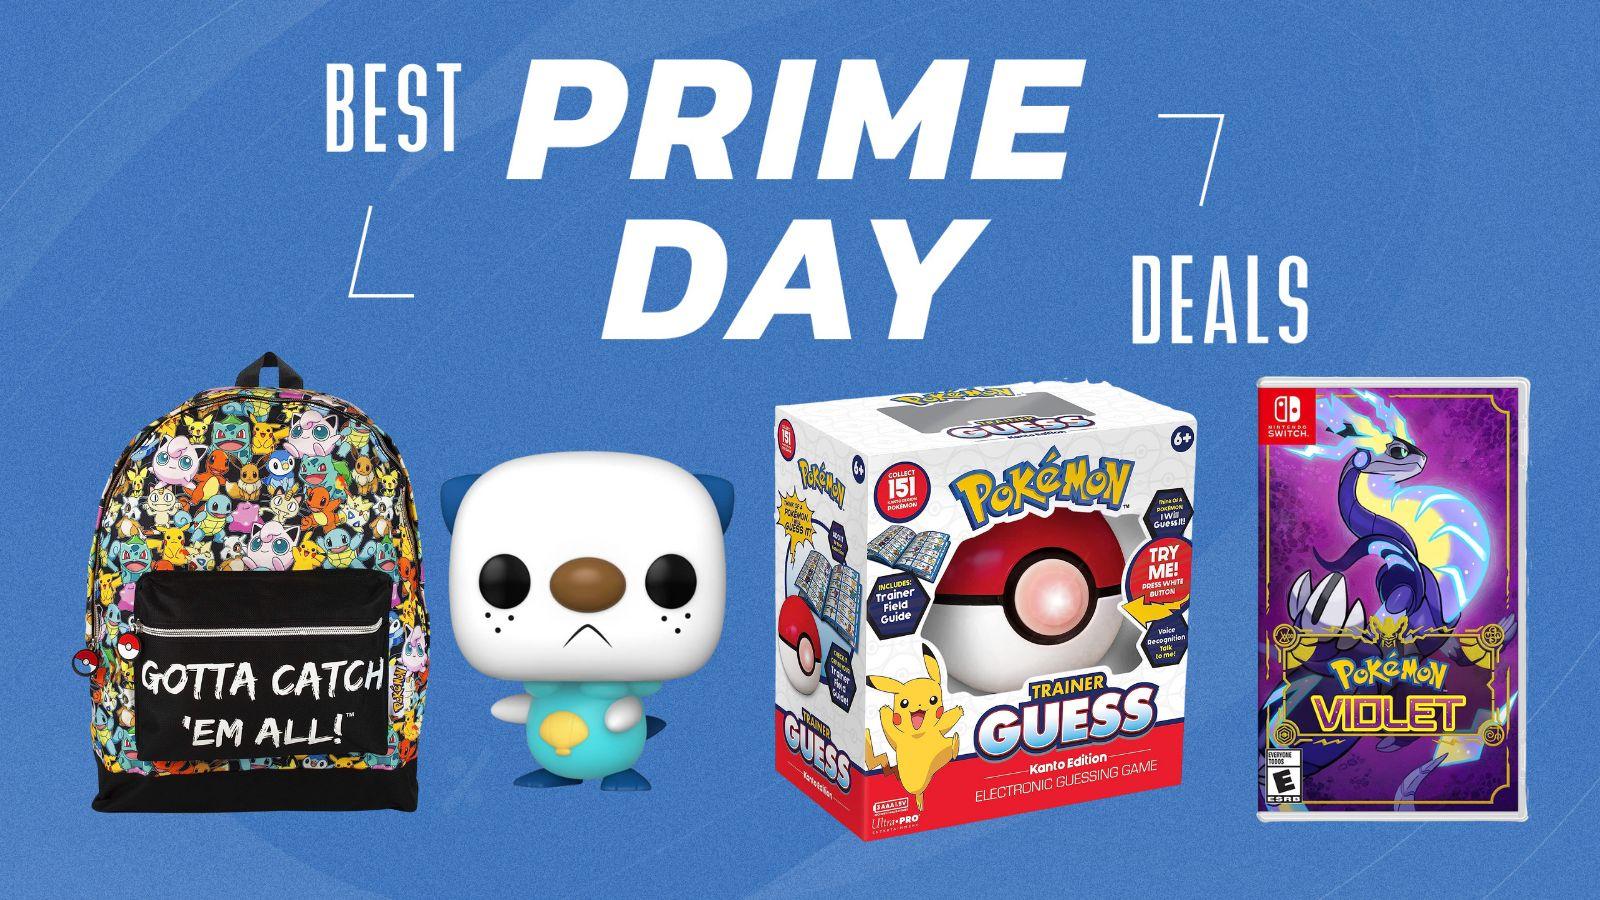 Pokemon toys and games deals